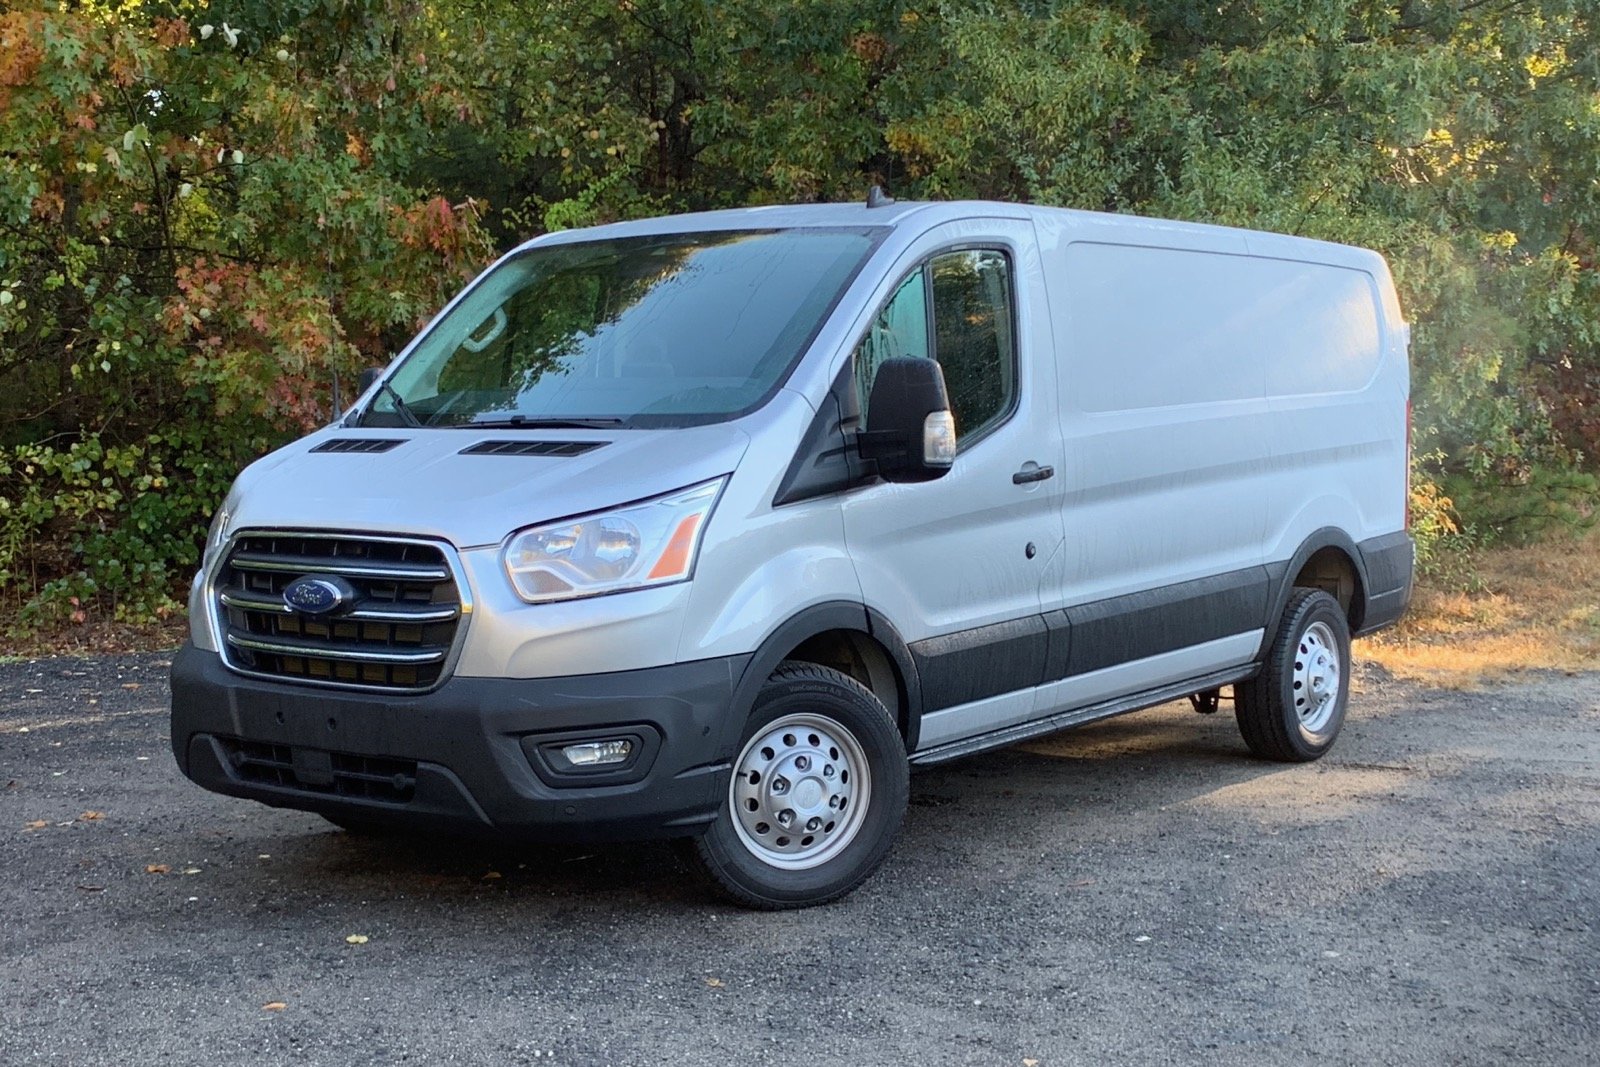 2020 Ford Transit Cargo Test Drive Review - CarGurus